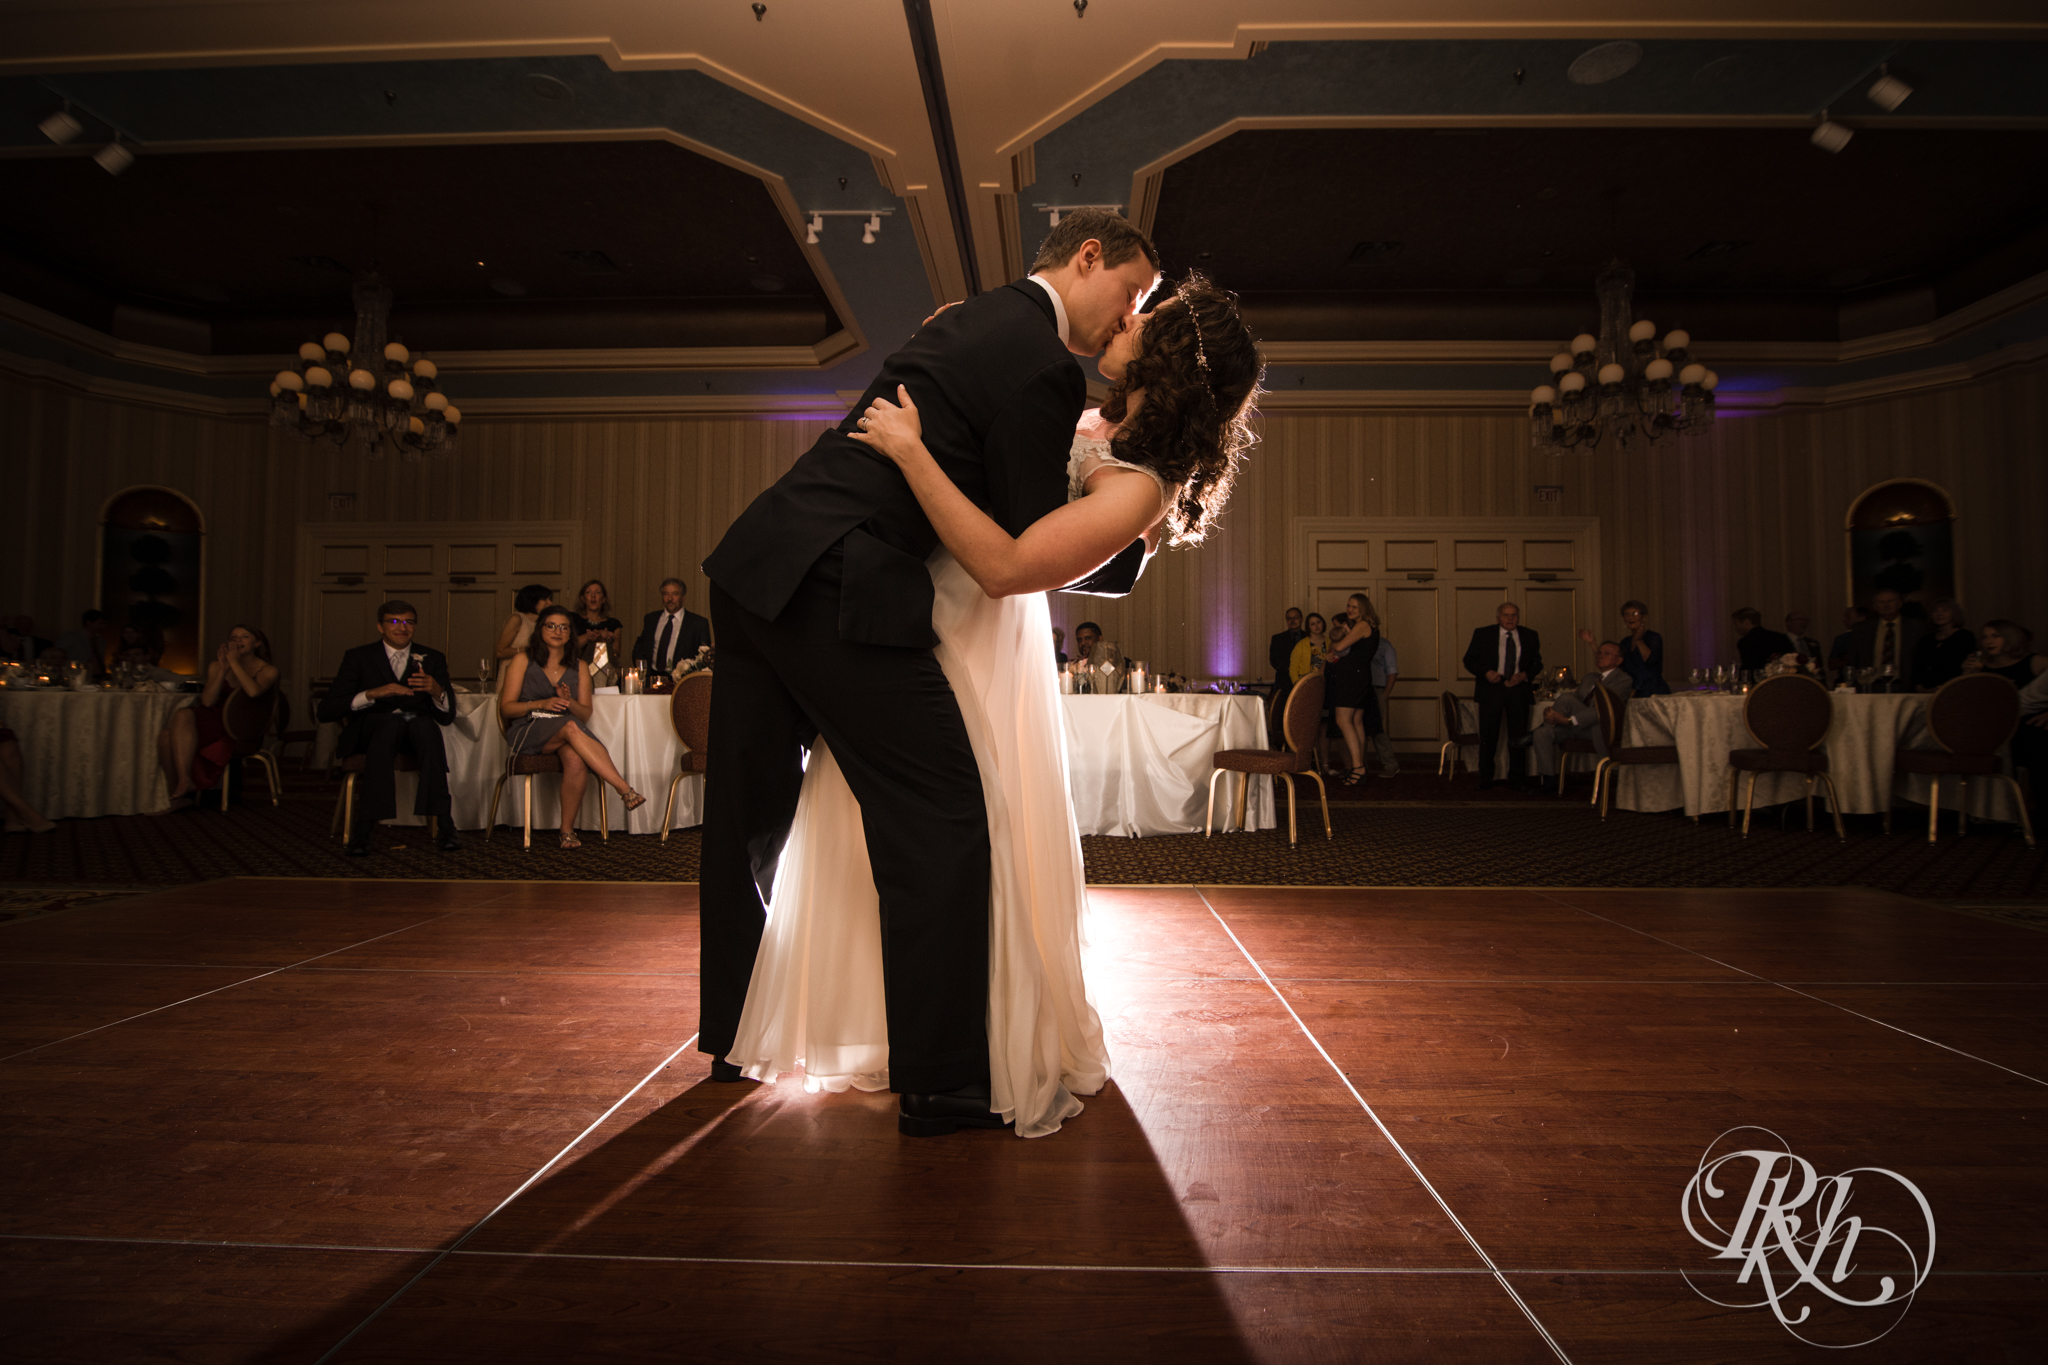 Bride and groom dance during wedding reception at the Saint Paul Hotel in Saint Paul, Minnesota.